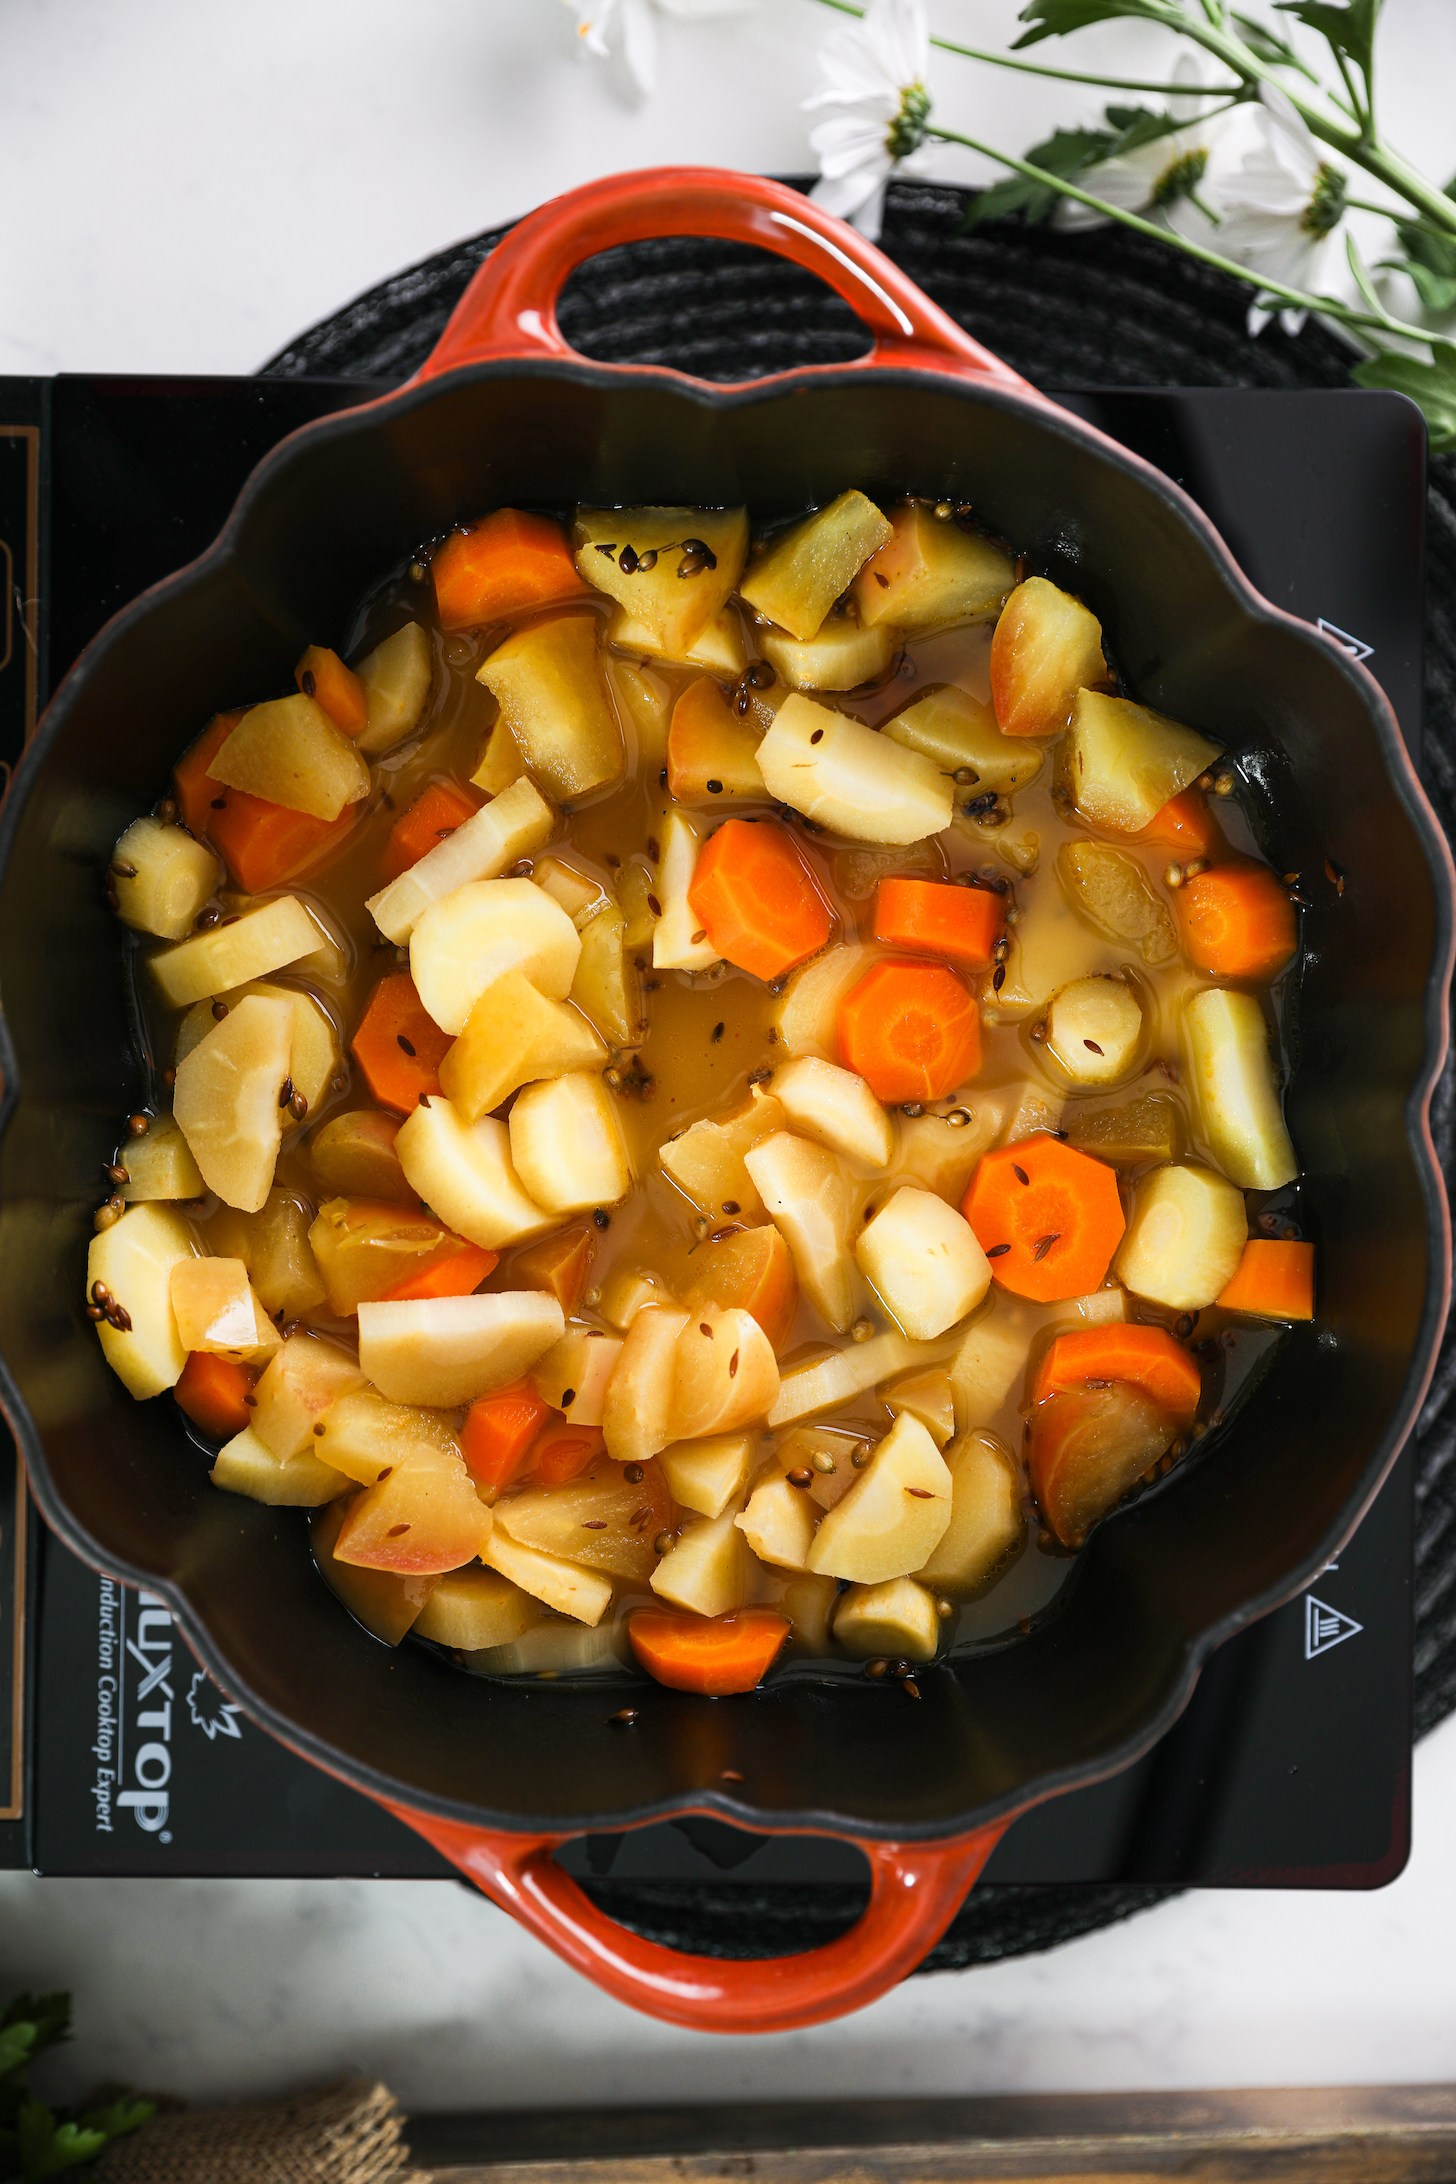 Overhead view of diced parsnips, apple, and carrots in stock inside a cooking pot.